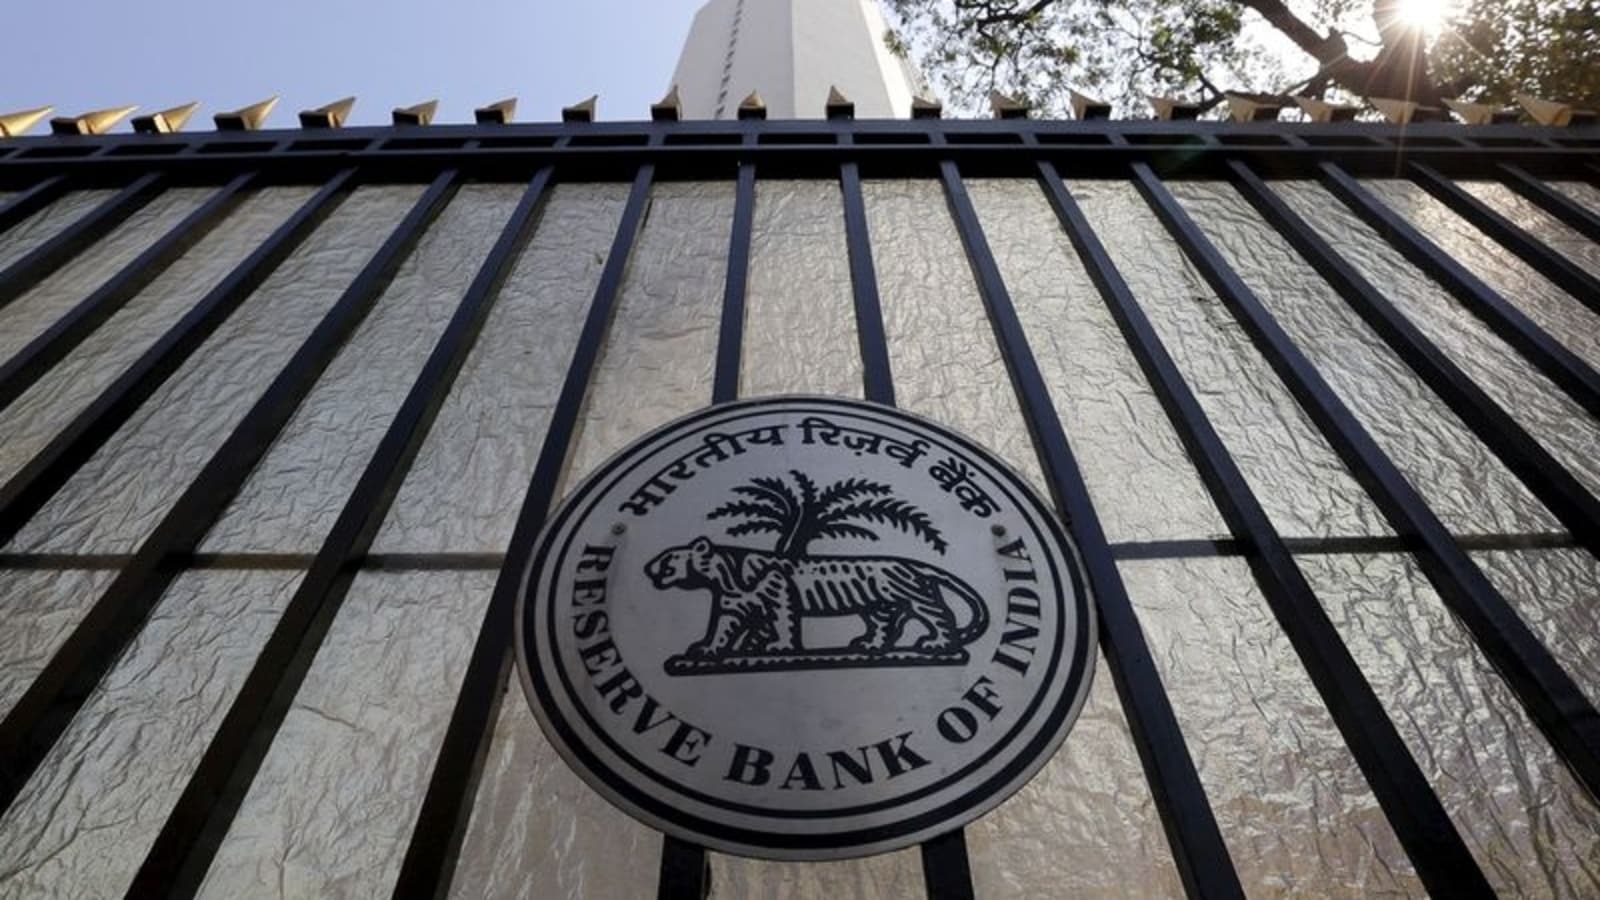 Another RBI rate hike on cards, warn experts, as inflation sees no ease: Report